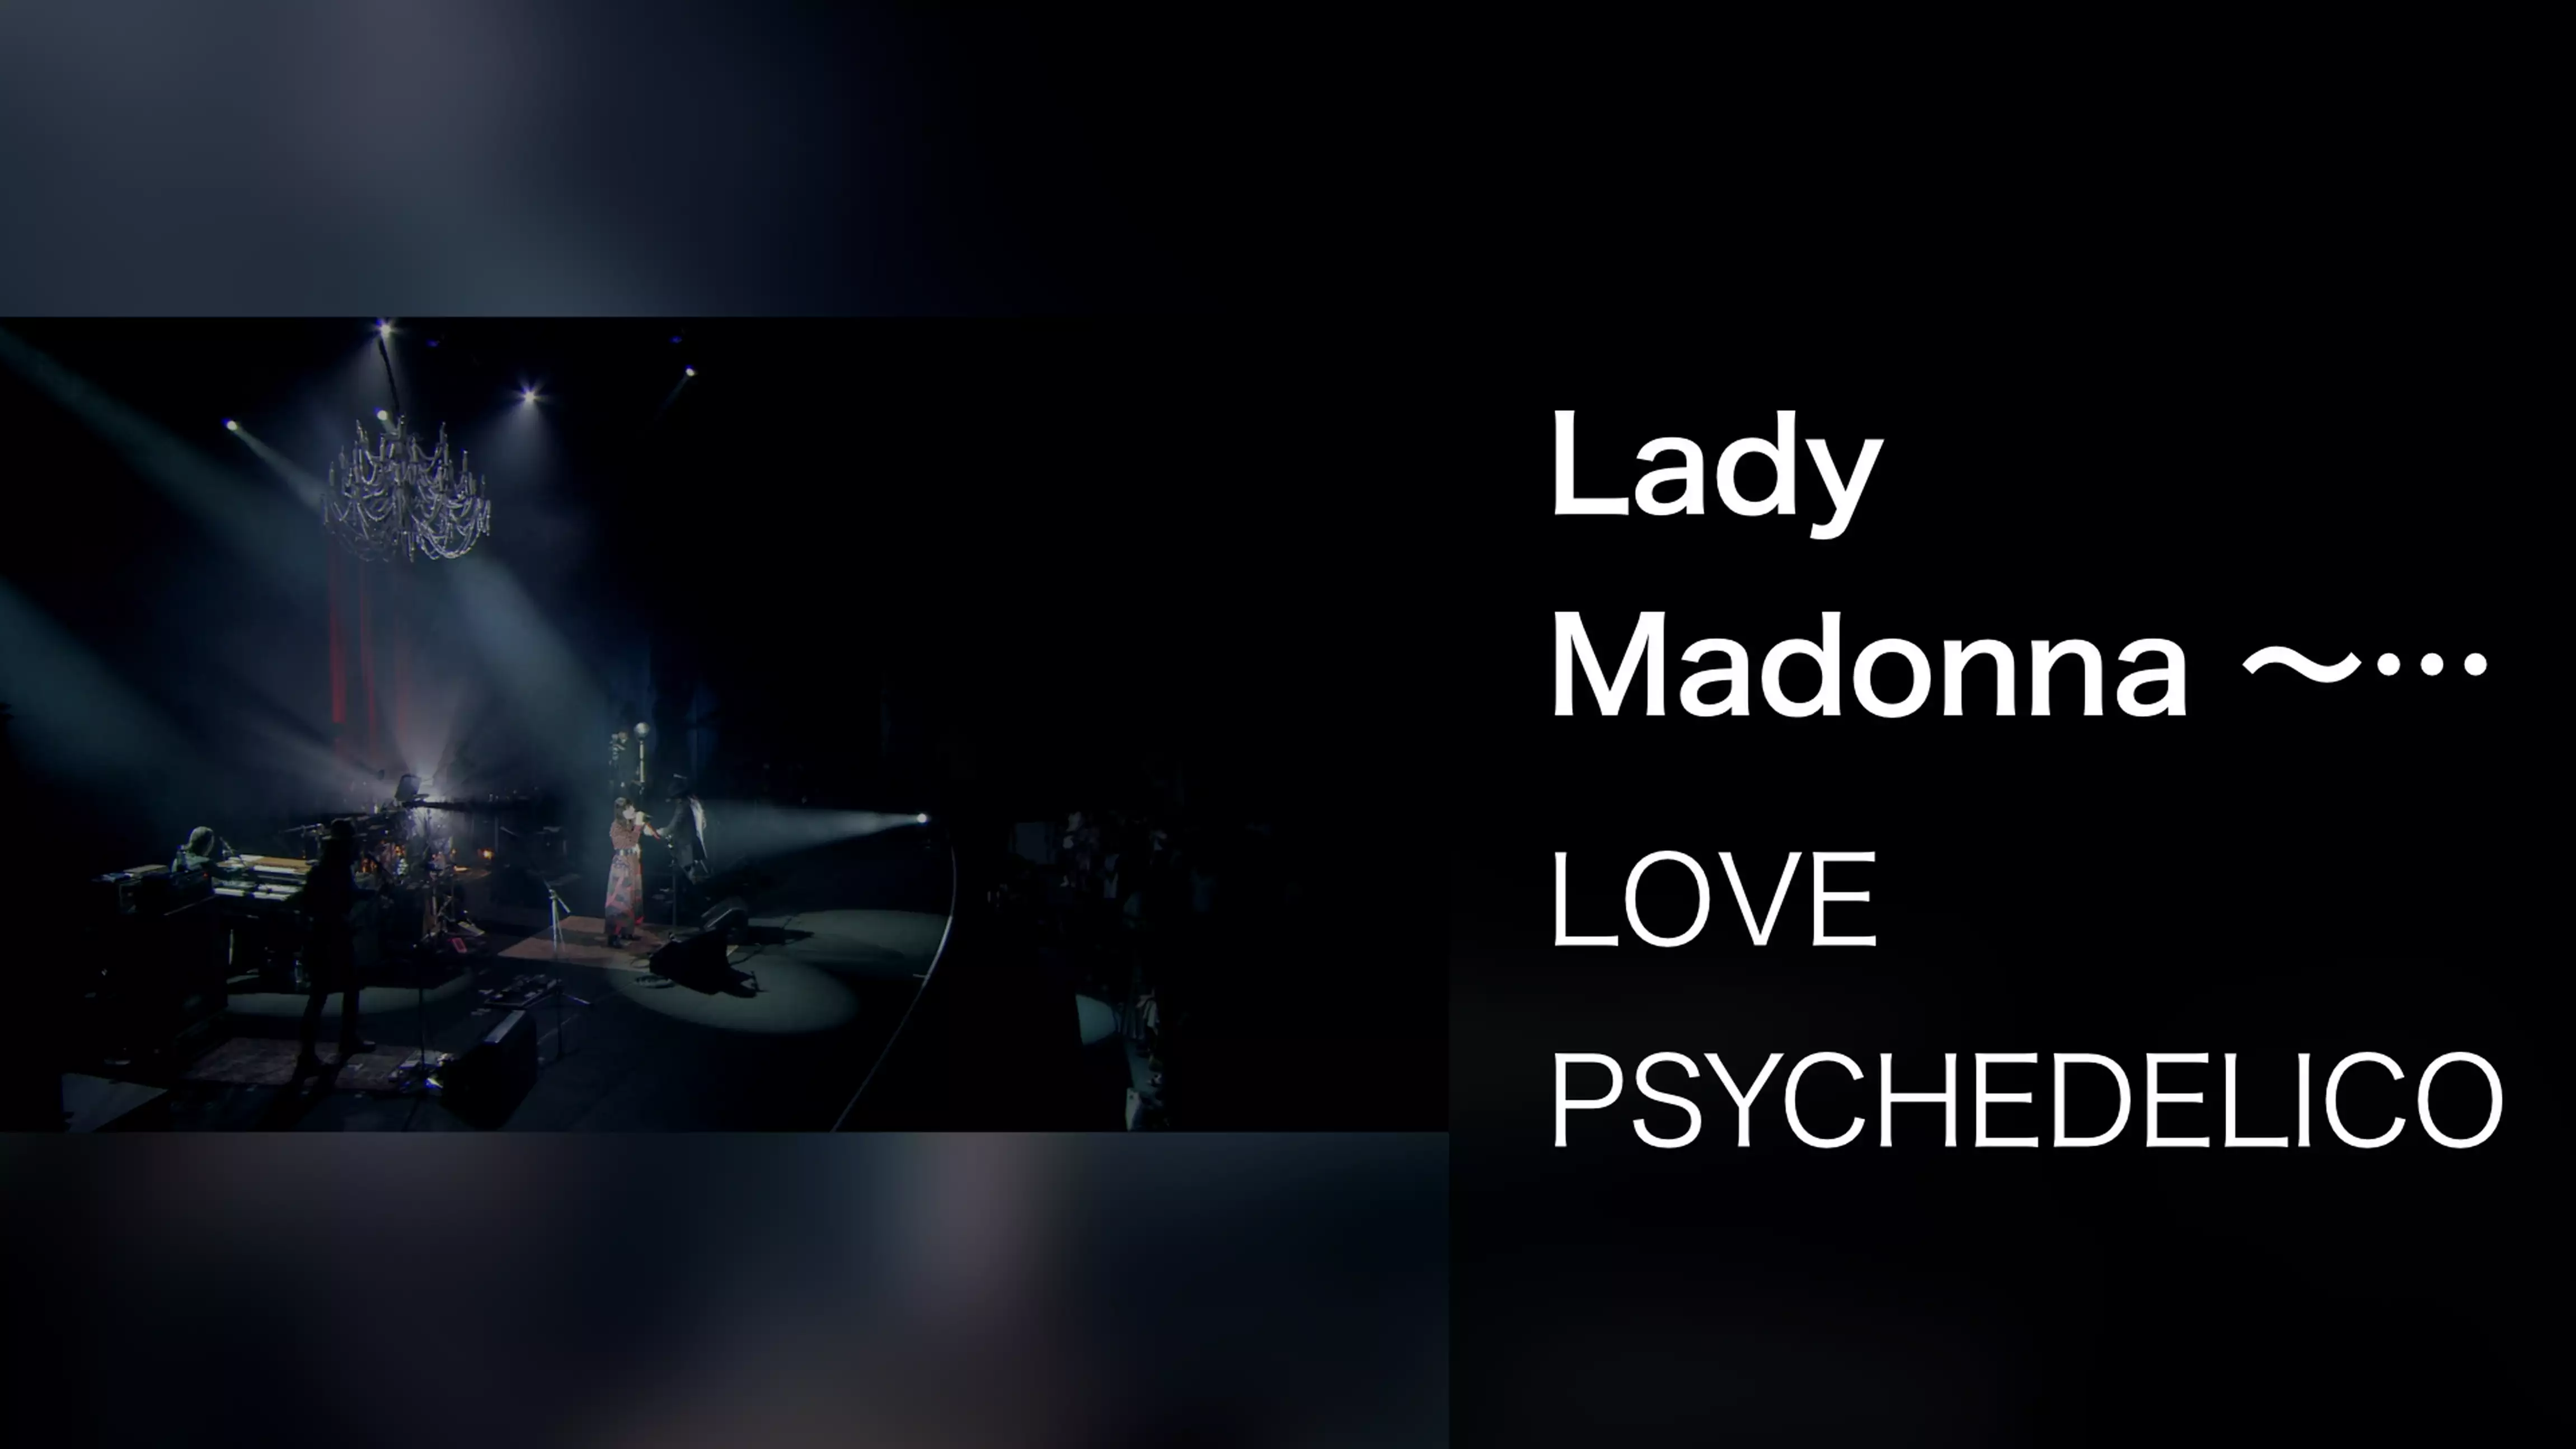 Lady Madonna ～憂鬱なるスパイダー～ (15th ANNIVERSARY TOUR -THE BEST- Live at SHOWA WOMEN’S UNIVERSITY HITOMI MEMORIAL HALL May 30th, 2015)